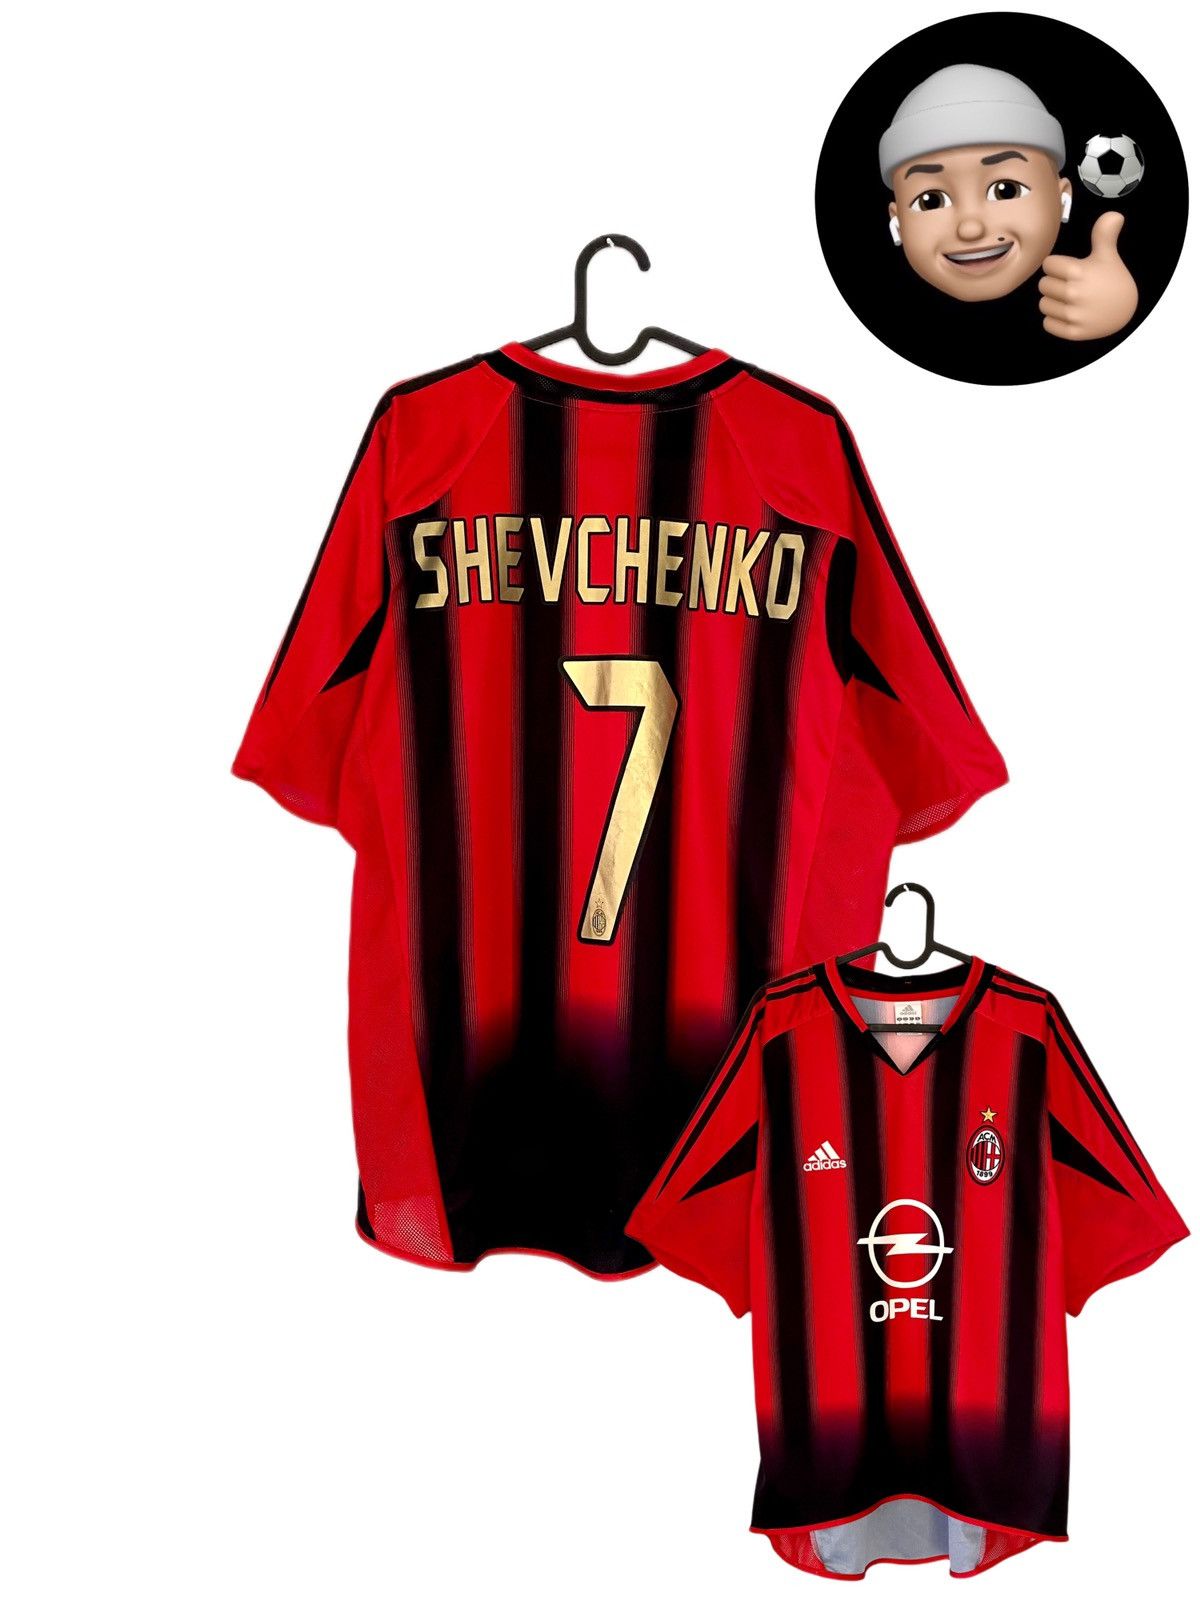 Pre-owned Adidas X Soccer Jersey 2004 2005 Ac Milan Shevchenko Adidas Vintage Soccer Jersey M In Red